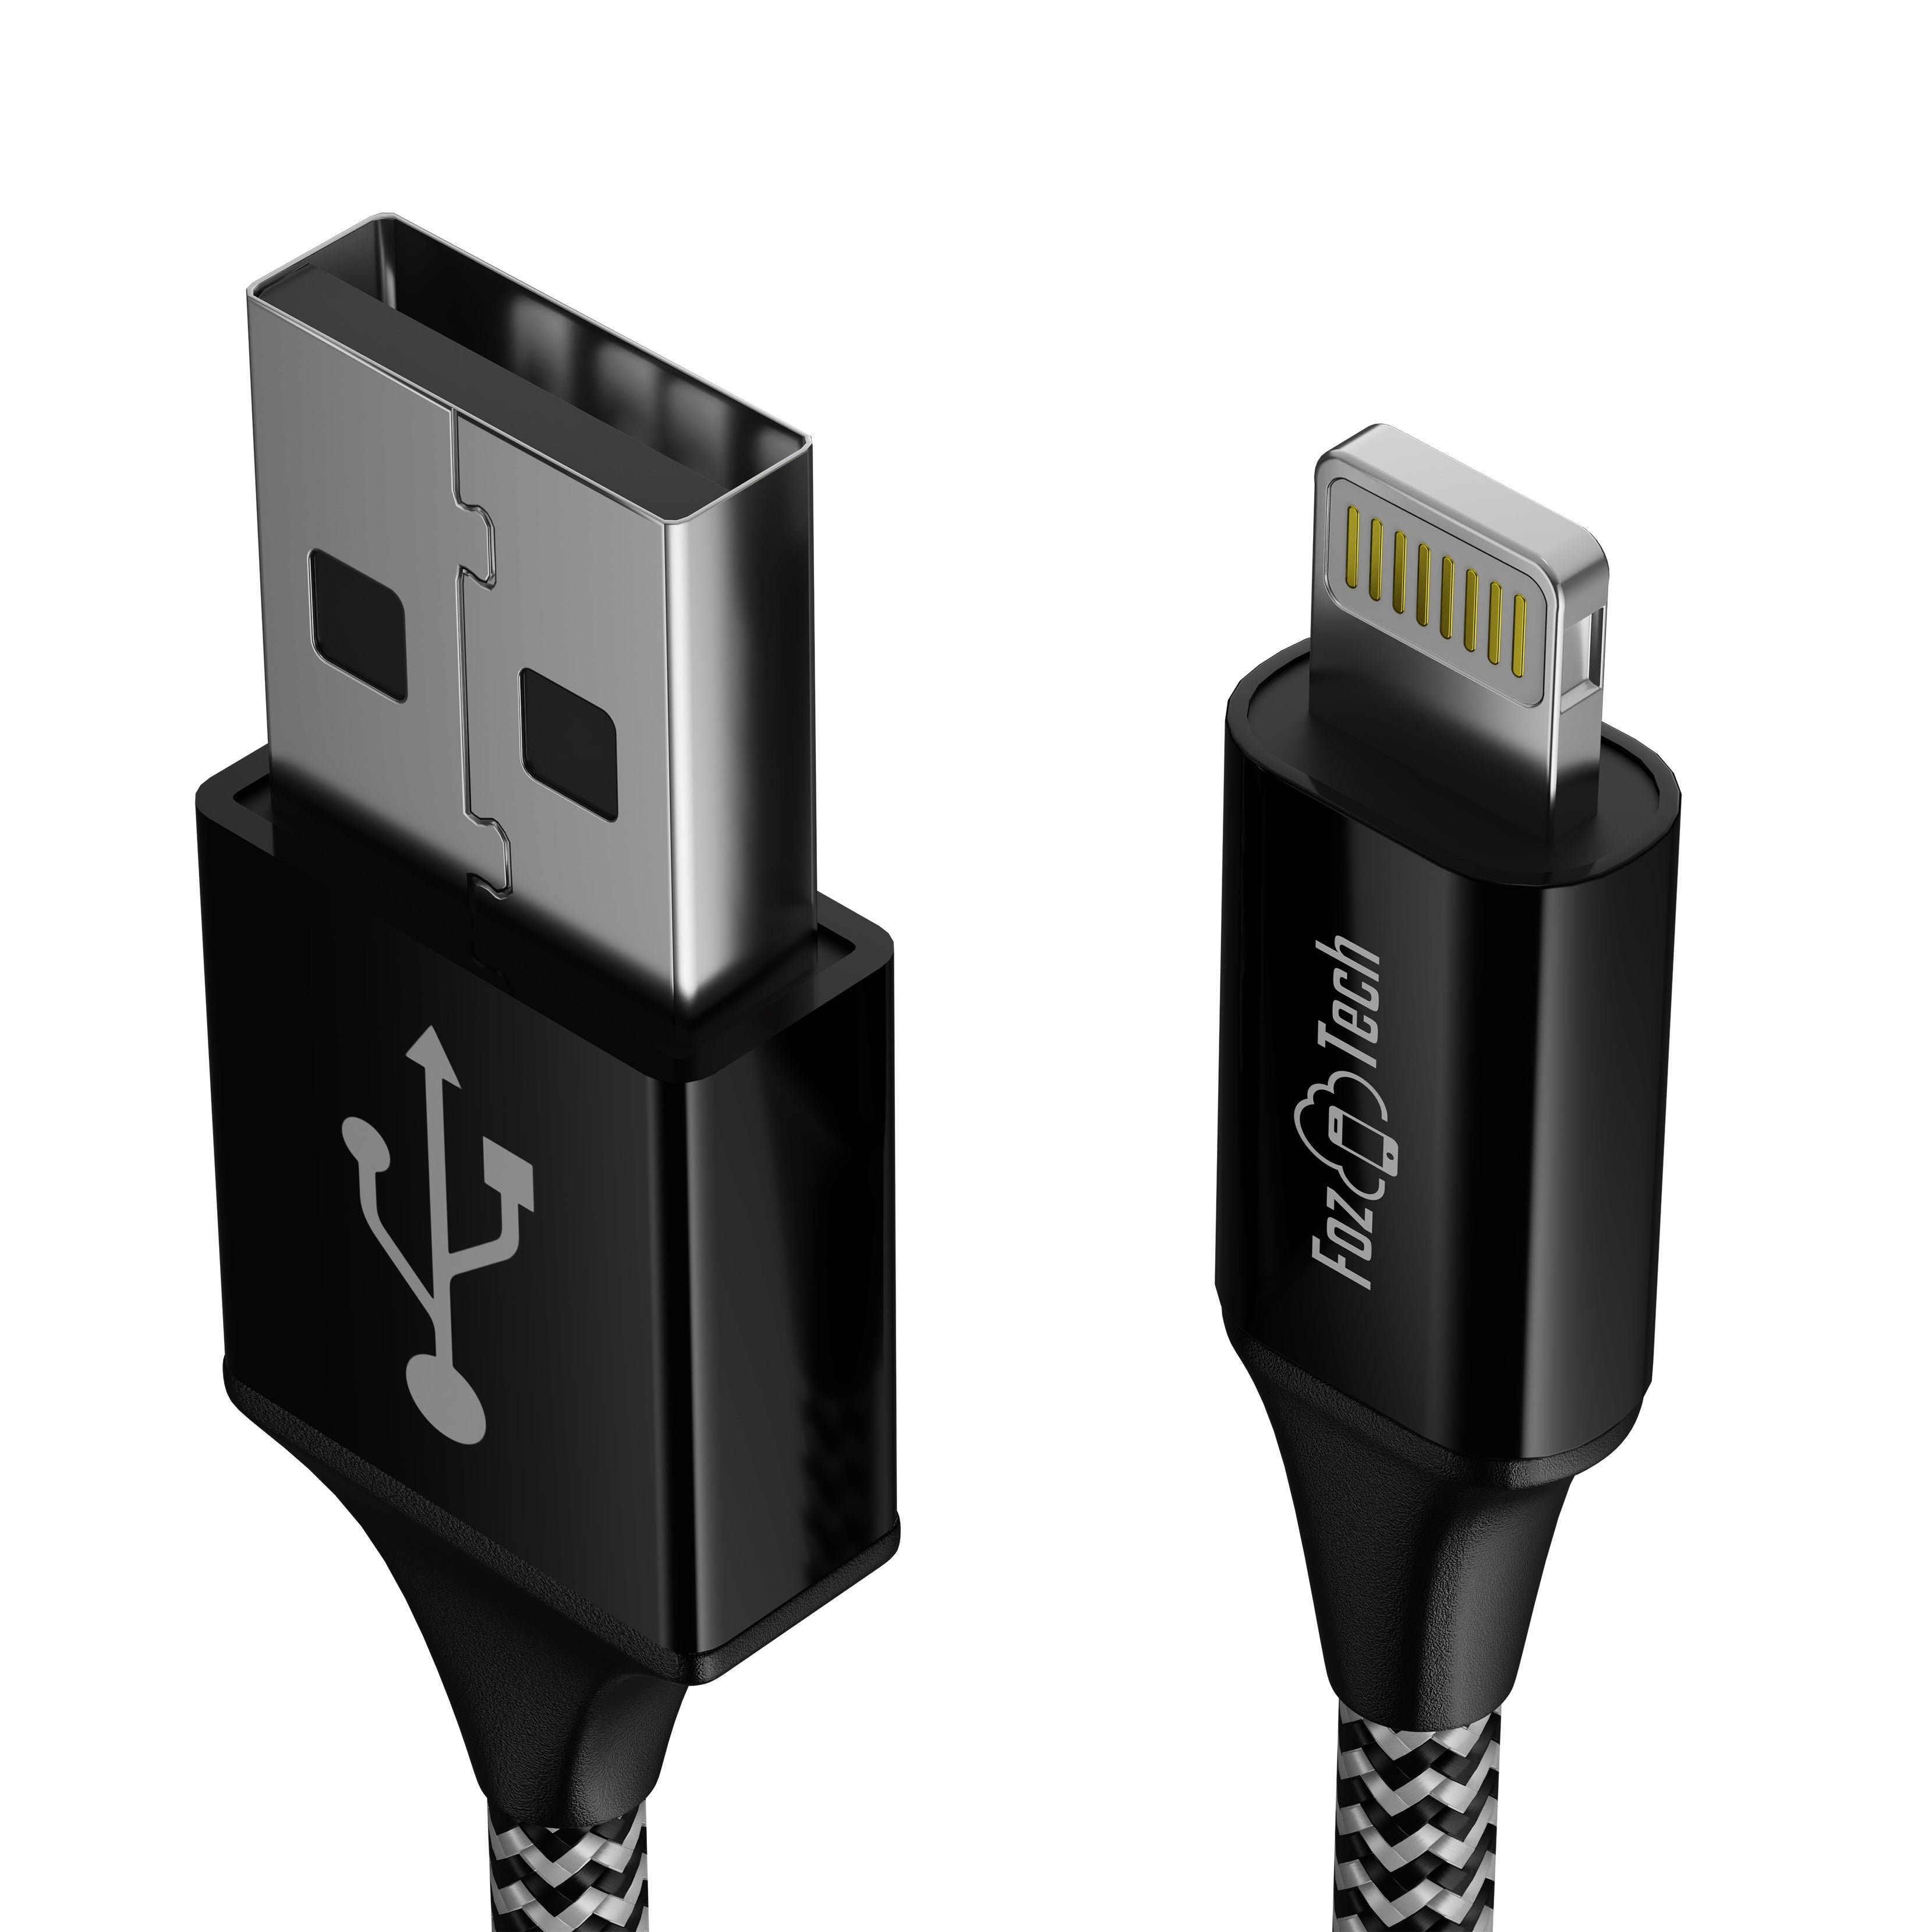 FozTech - PRO Series - USB Charger Cable Data Sync Lead for iPhone, iPad, iPod - Black - USB Cable - FozTech